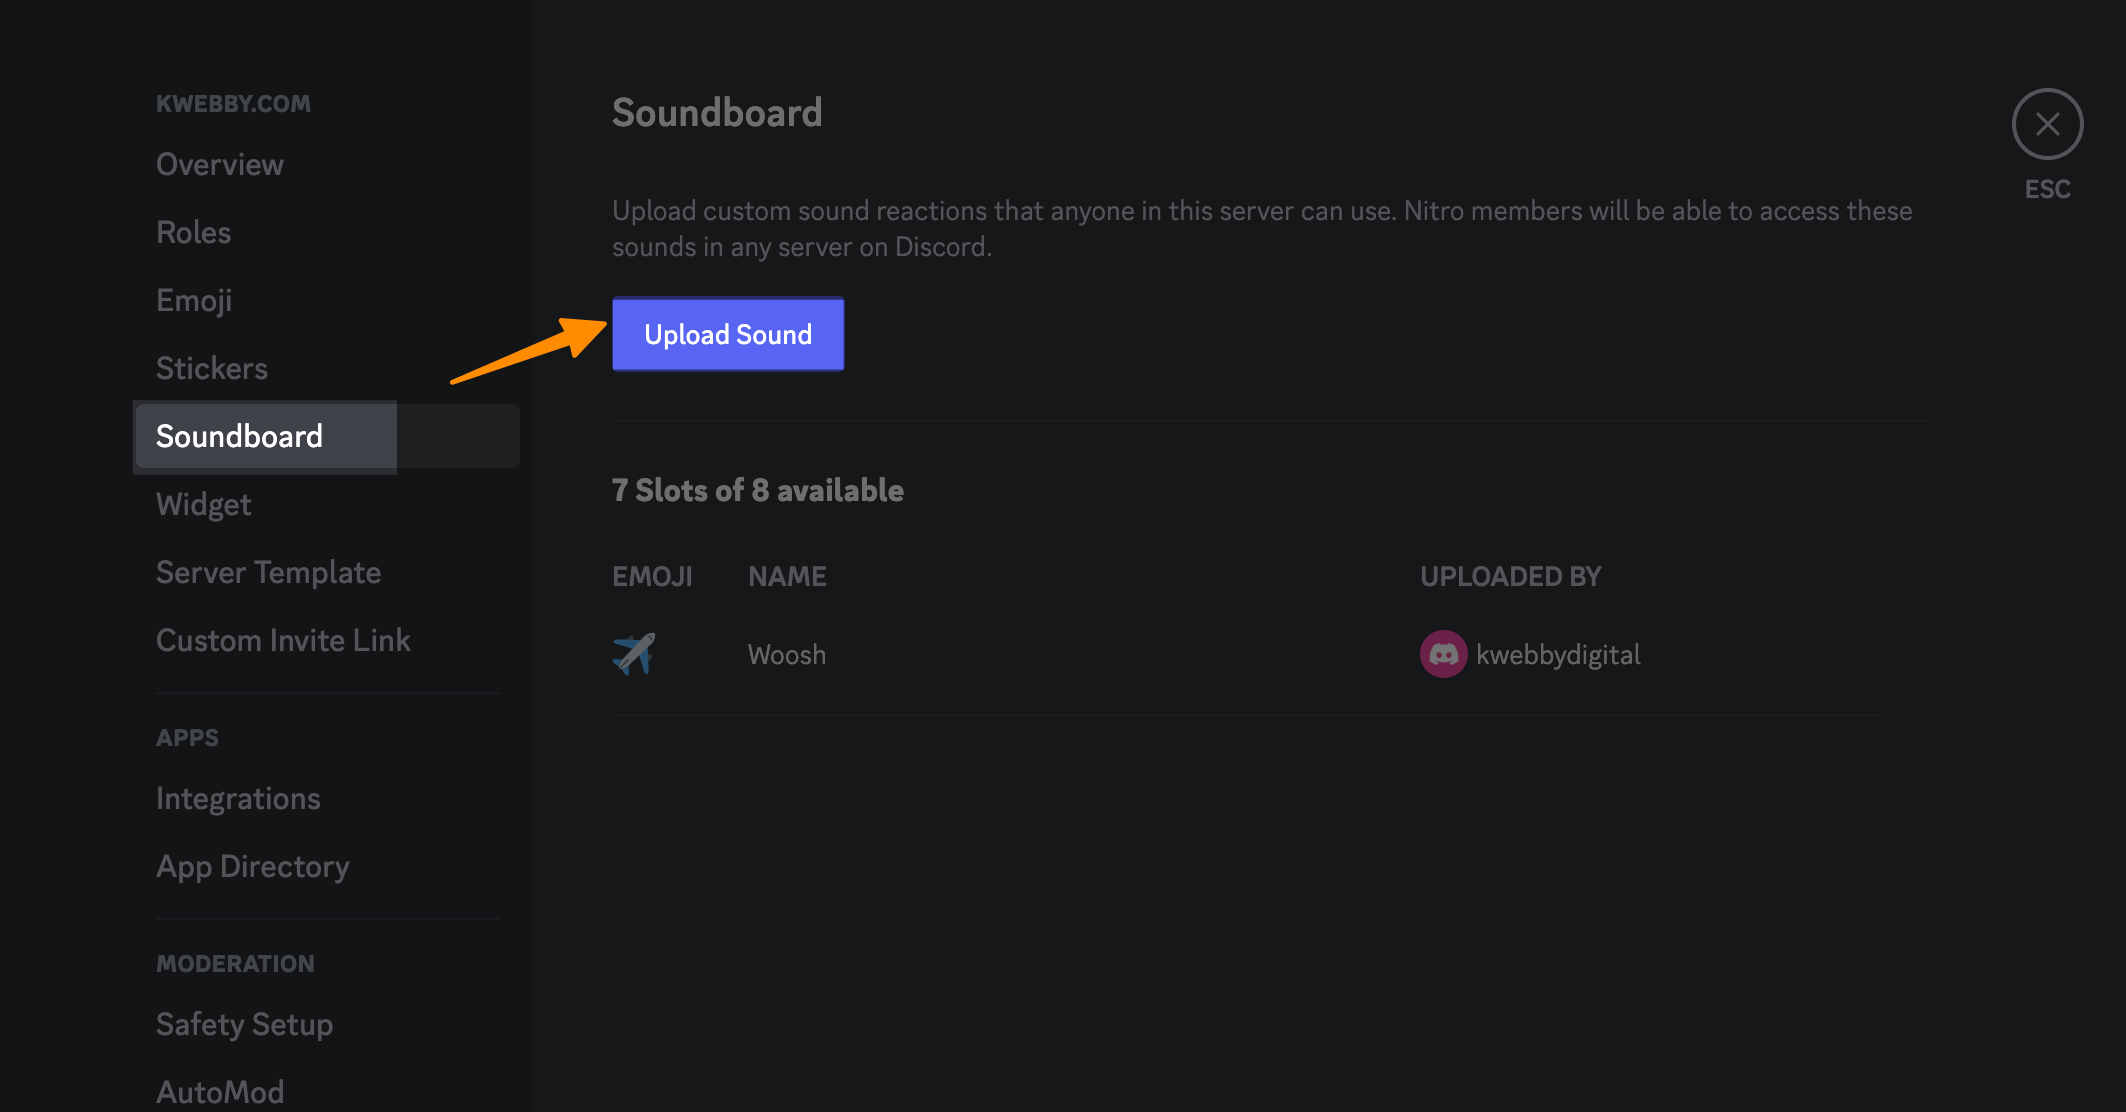 How to add a sound to the discord soundboard in 2 Clicks 8